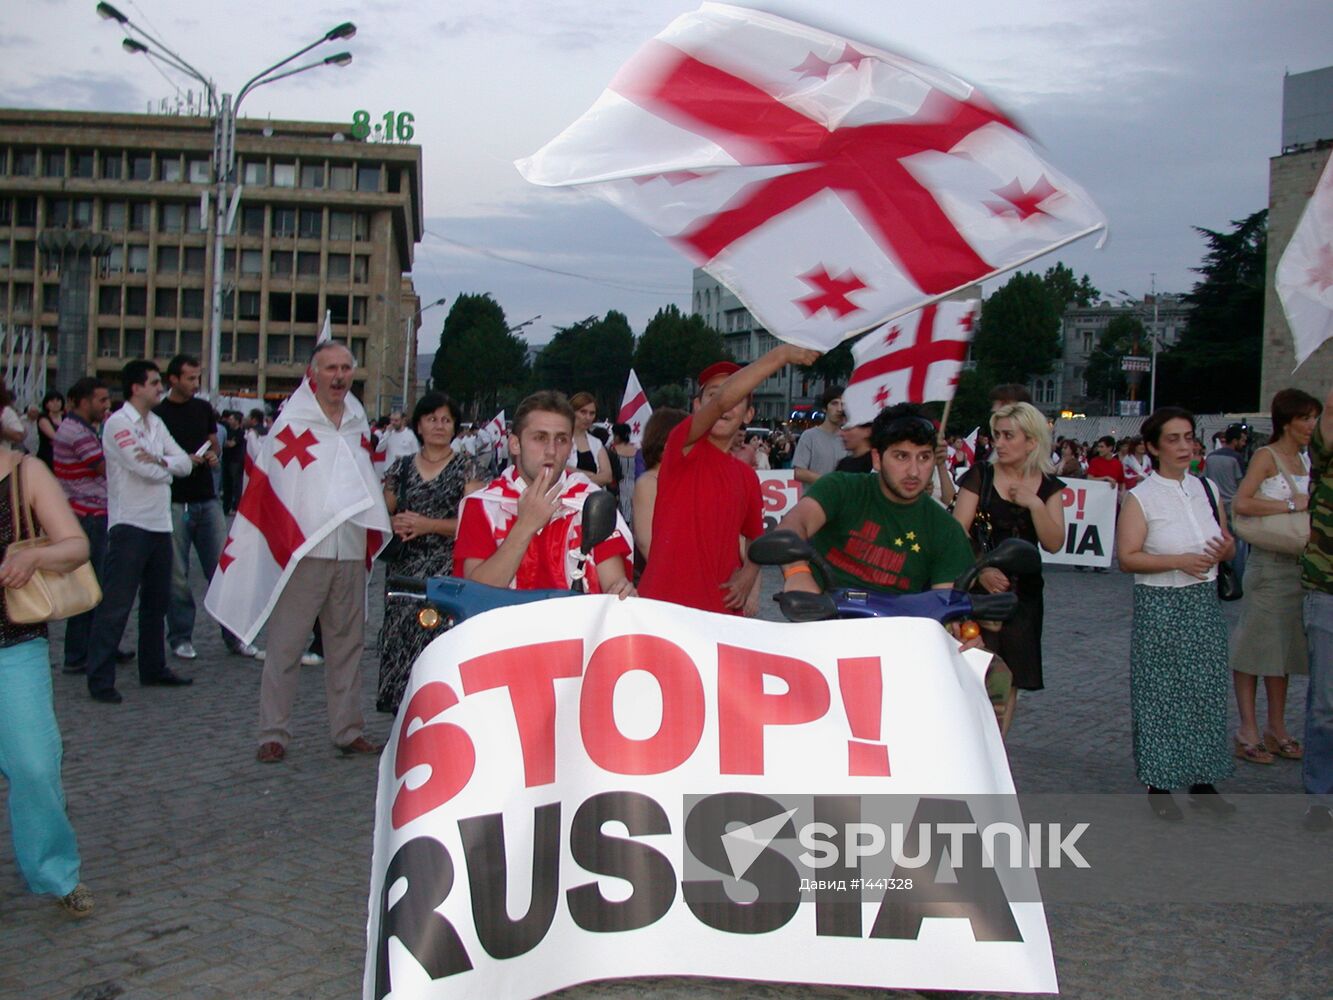 Rally "Stop, Russia!" in Tbilisi